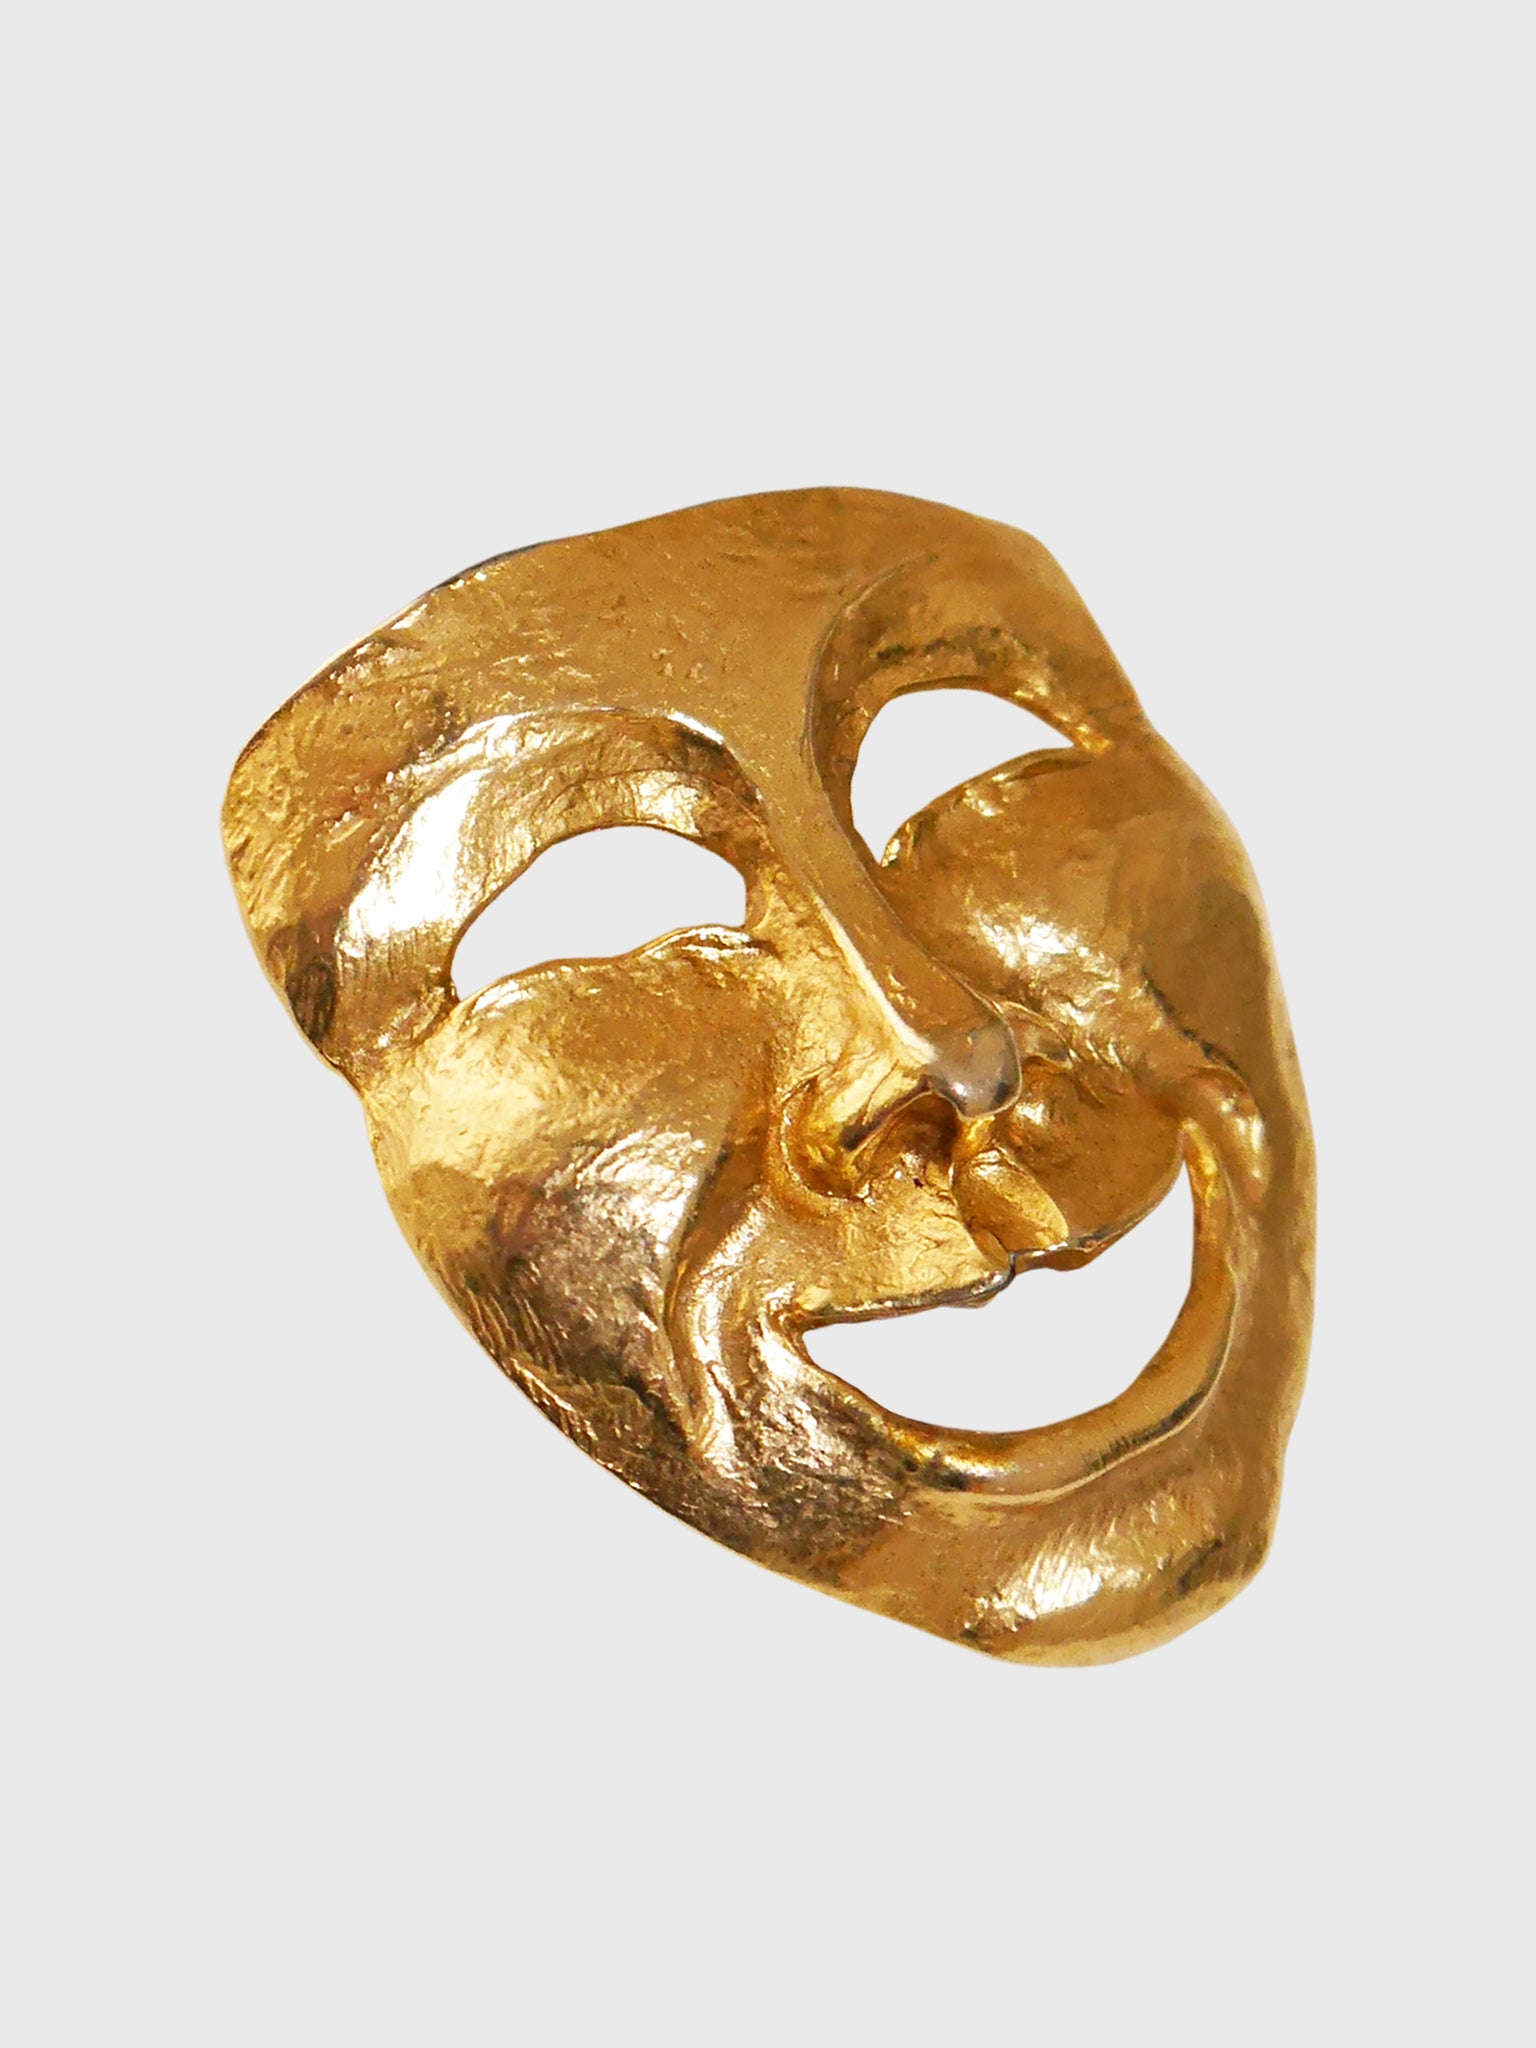 MOSCHINO 1980s 1990s Vintage Gold-Tone Theater Comedy Thalia Mask Brooch